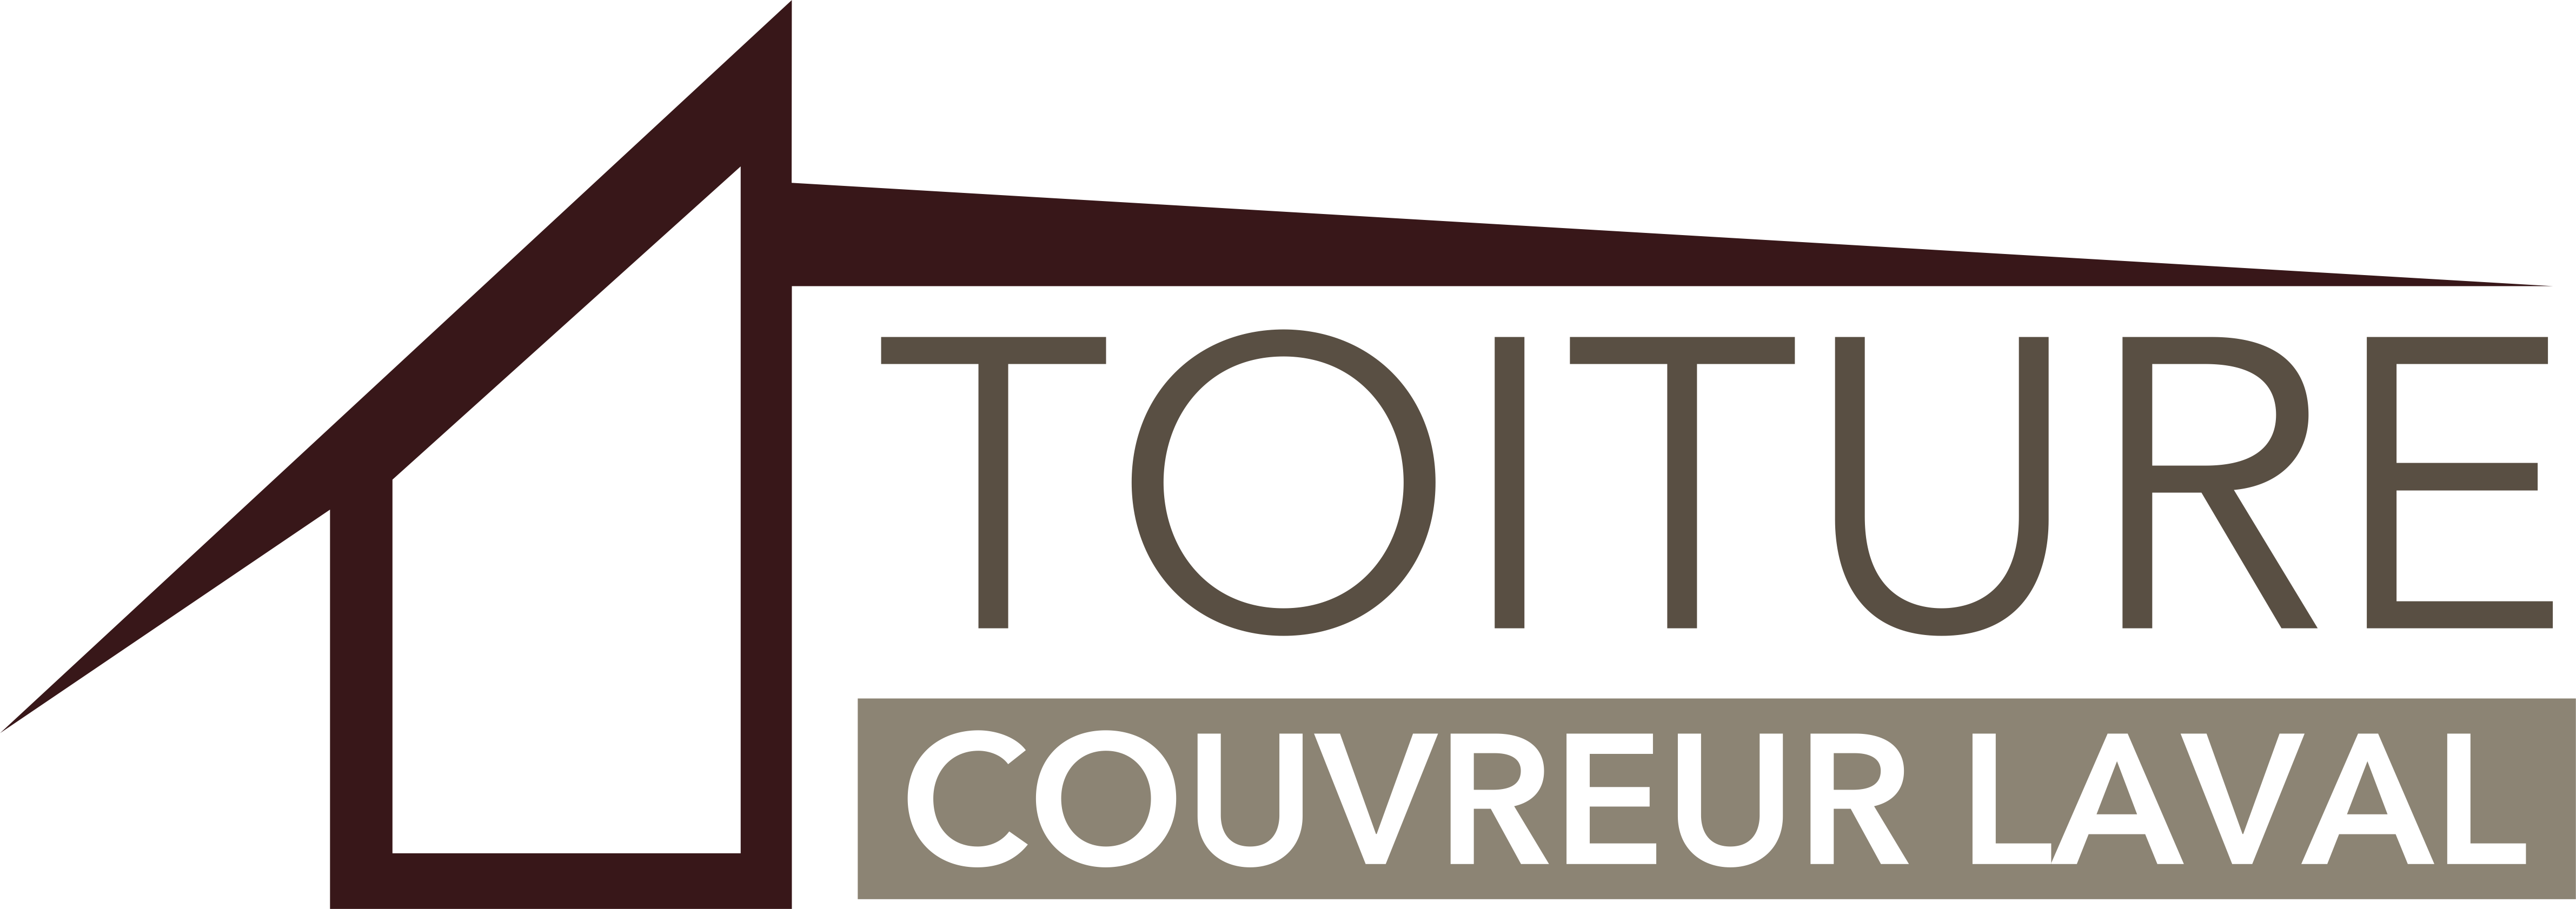 Toiture-couvreur-laval